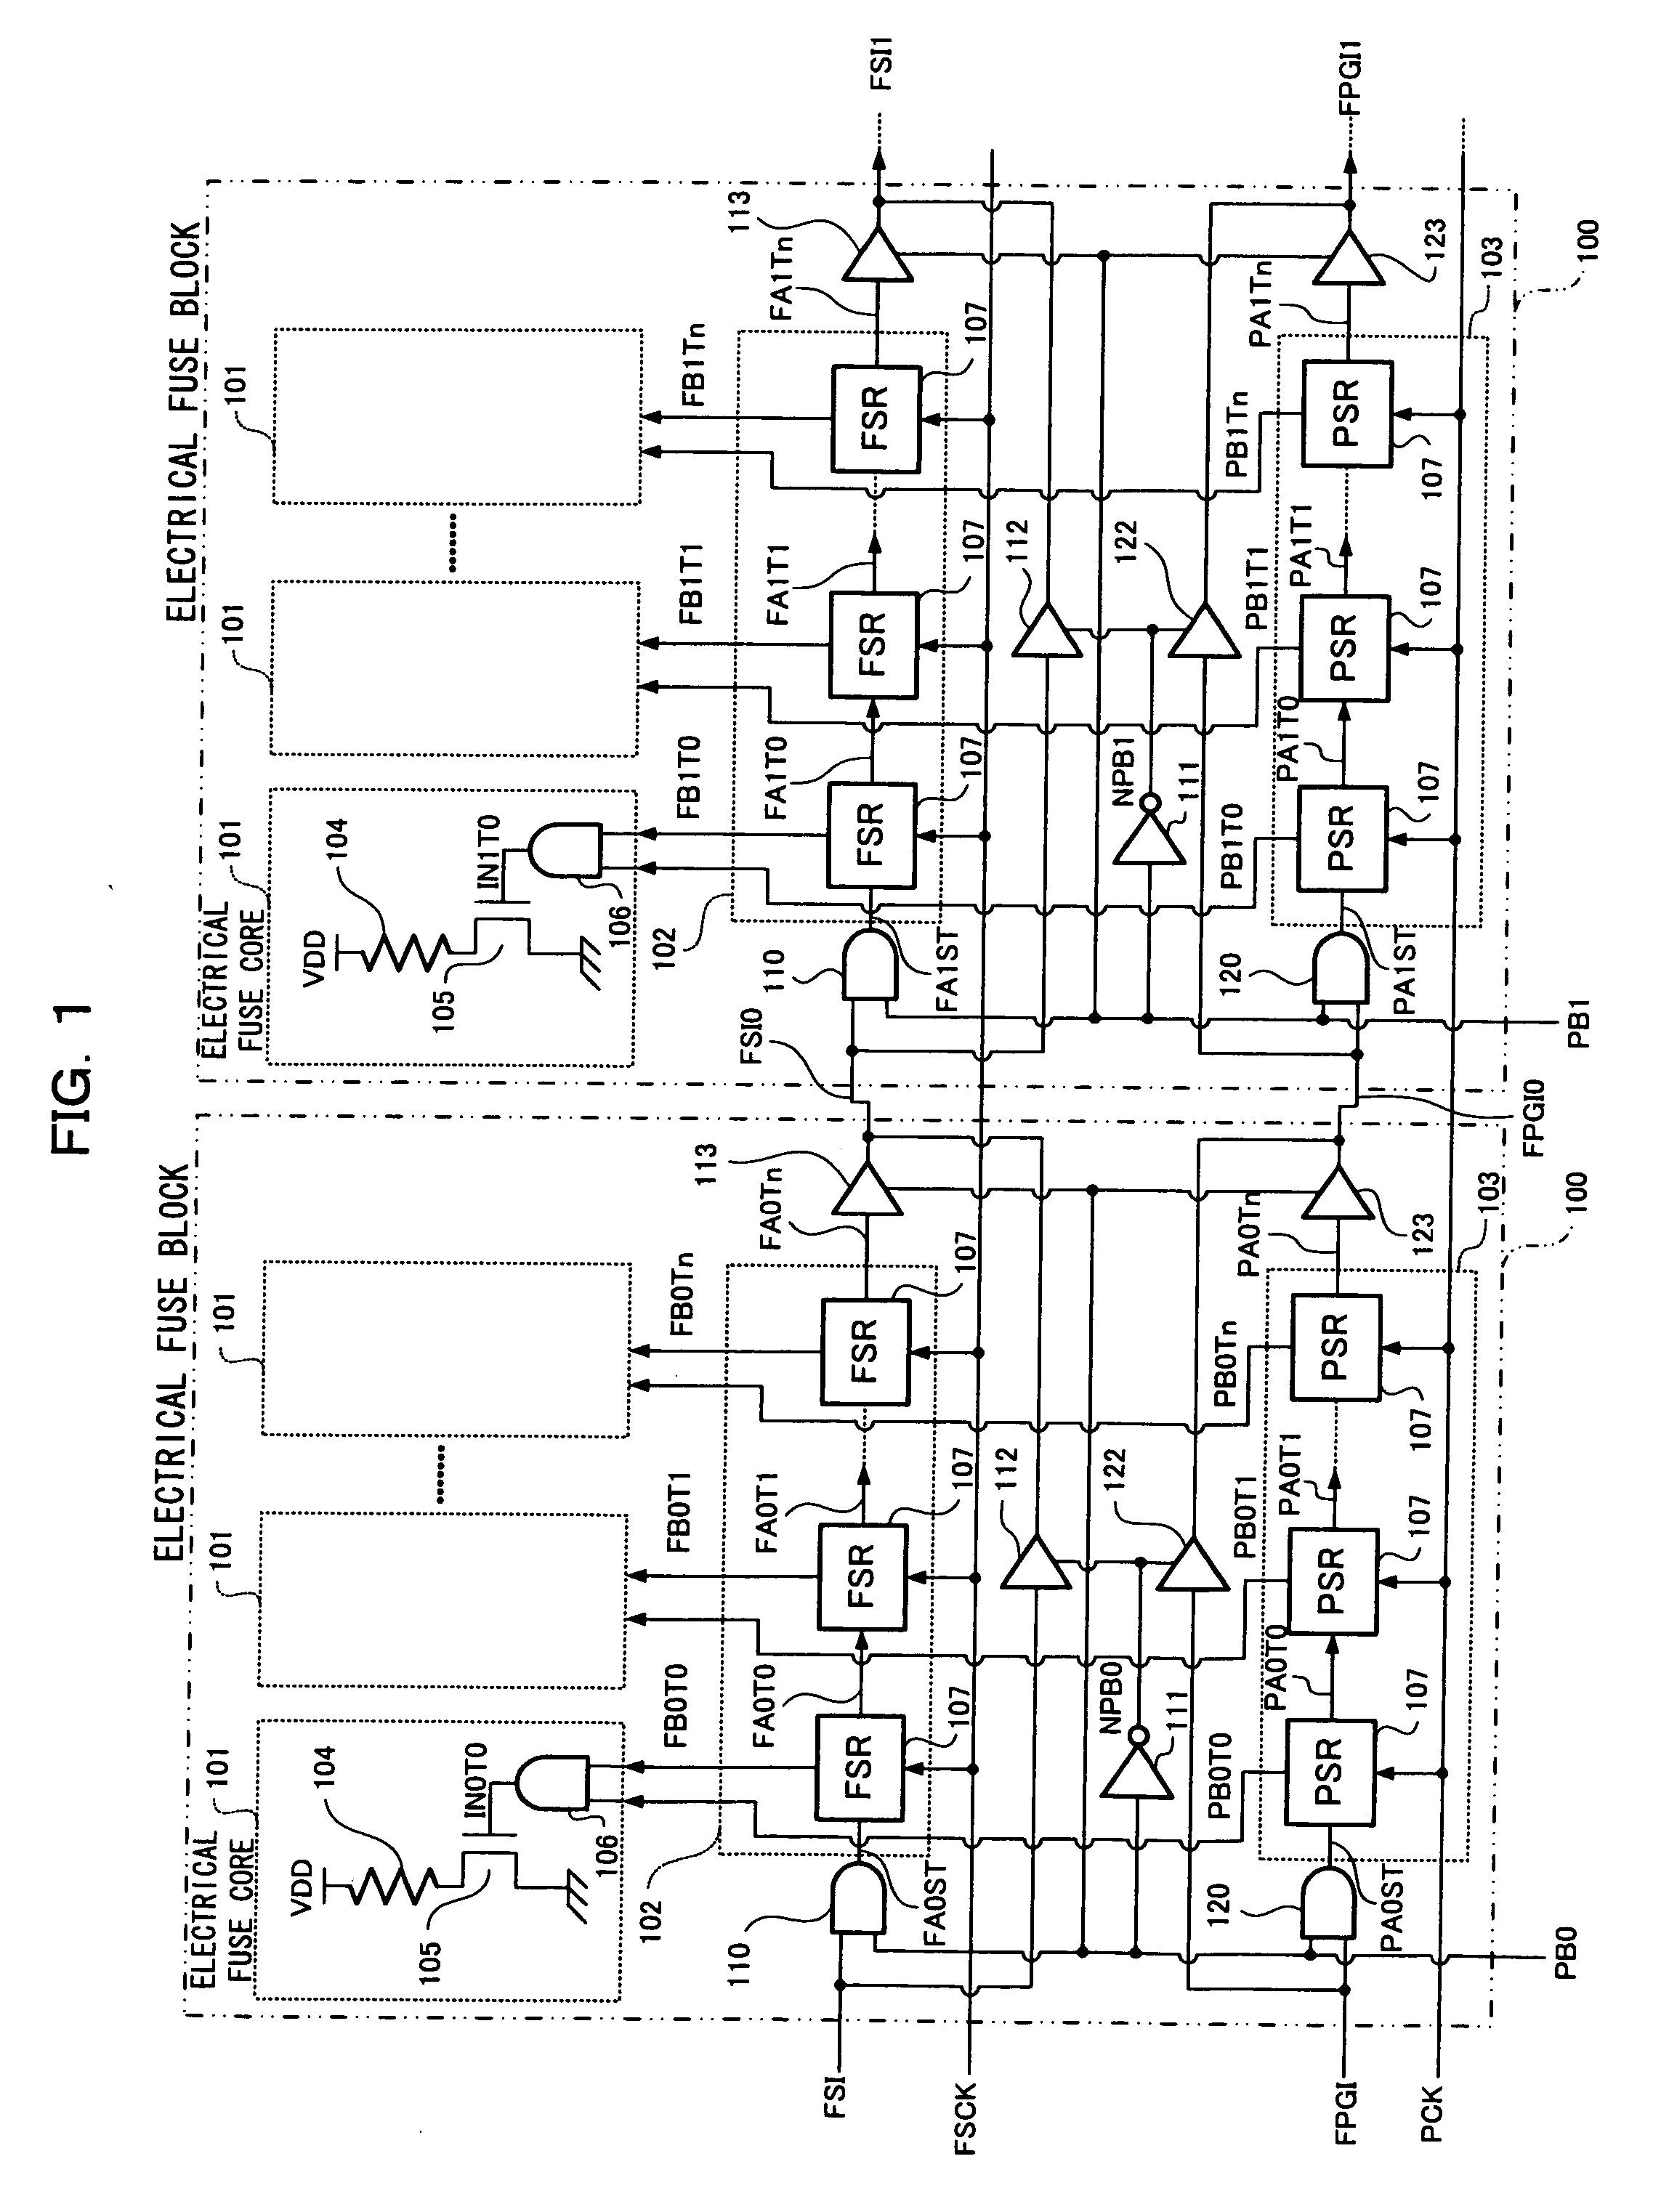 Semiconductor storage device including electrical fuse module